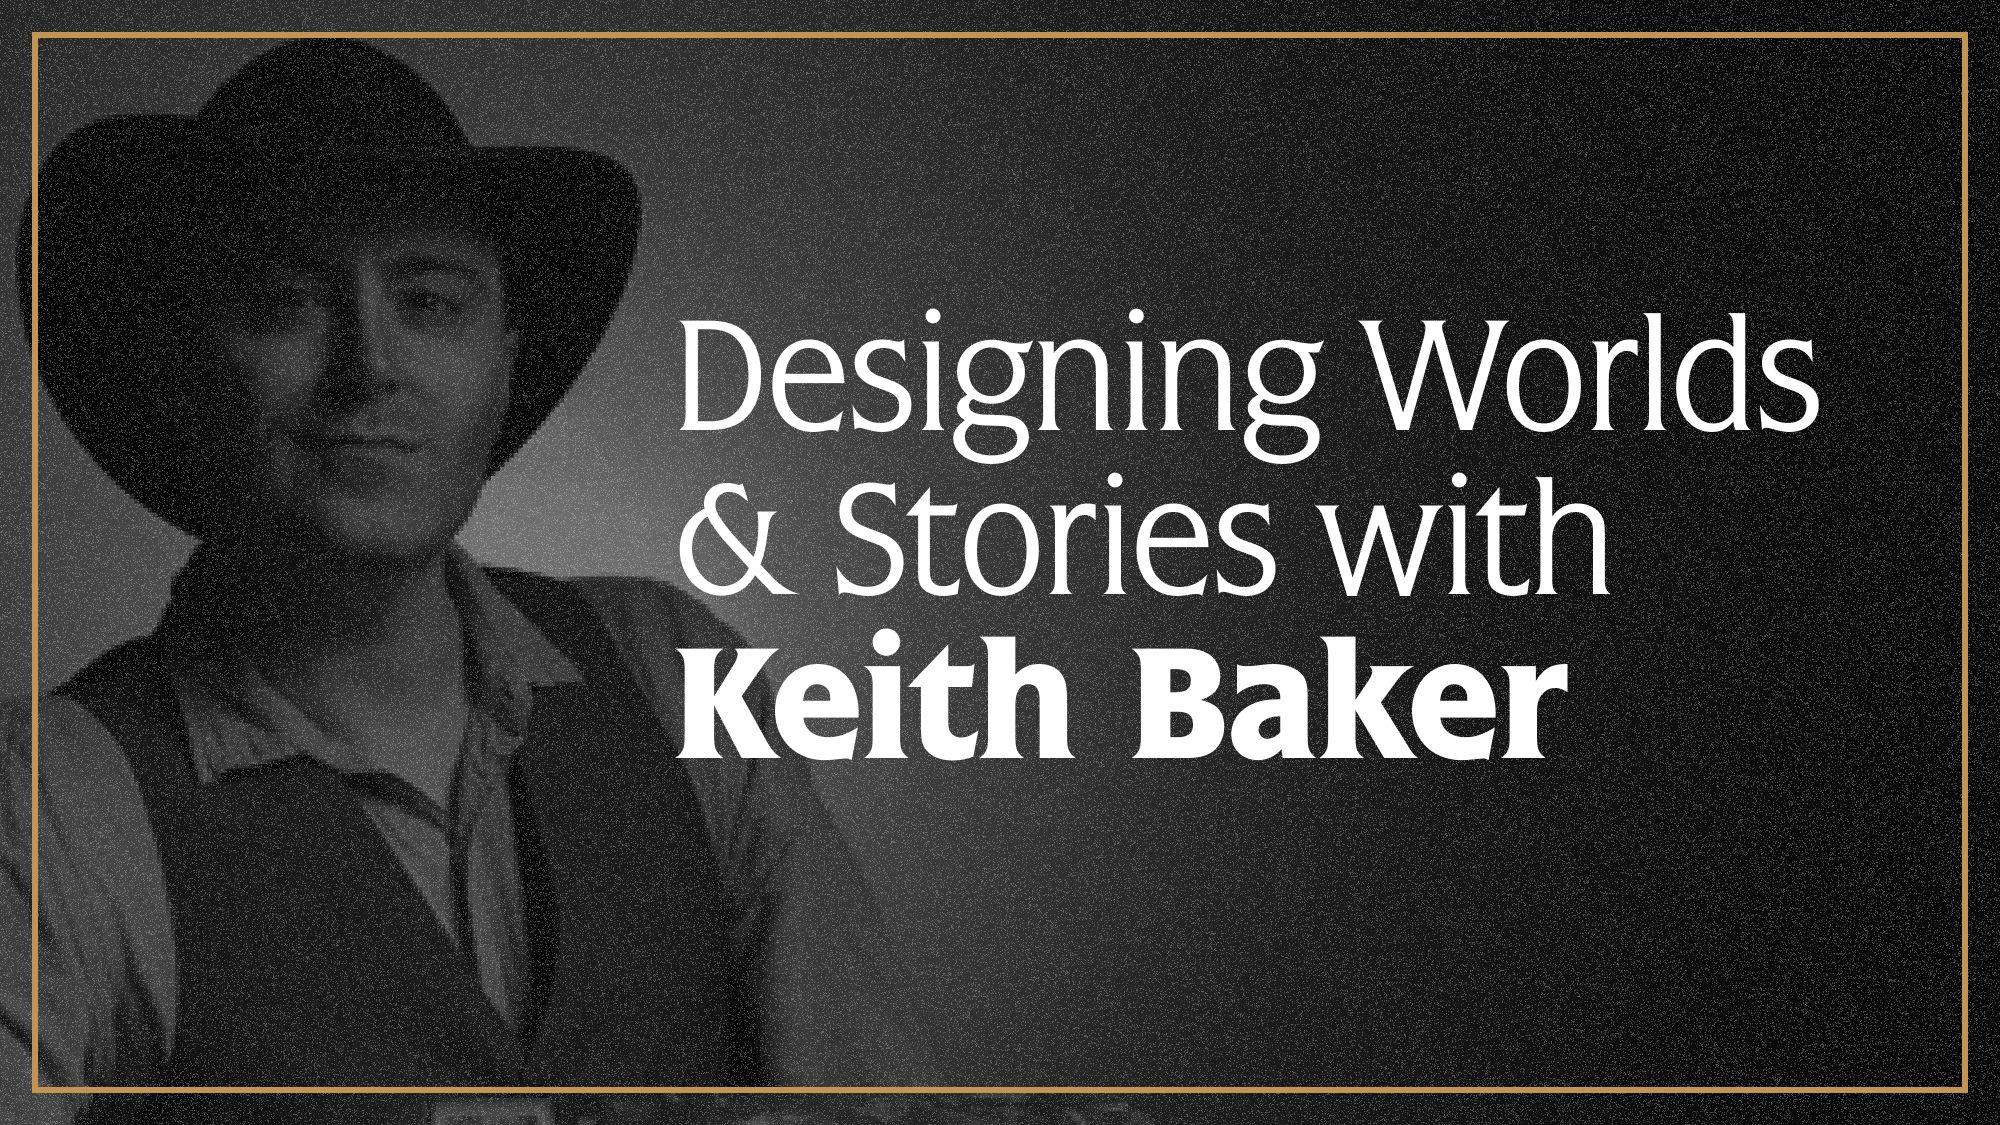 "Designing Worlds & Stories with Keith Baker", alongside a portrait of Keith Baker looking snazzy in a cowboy hat.